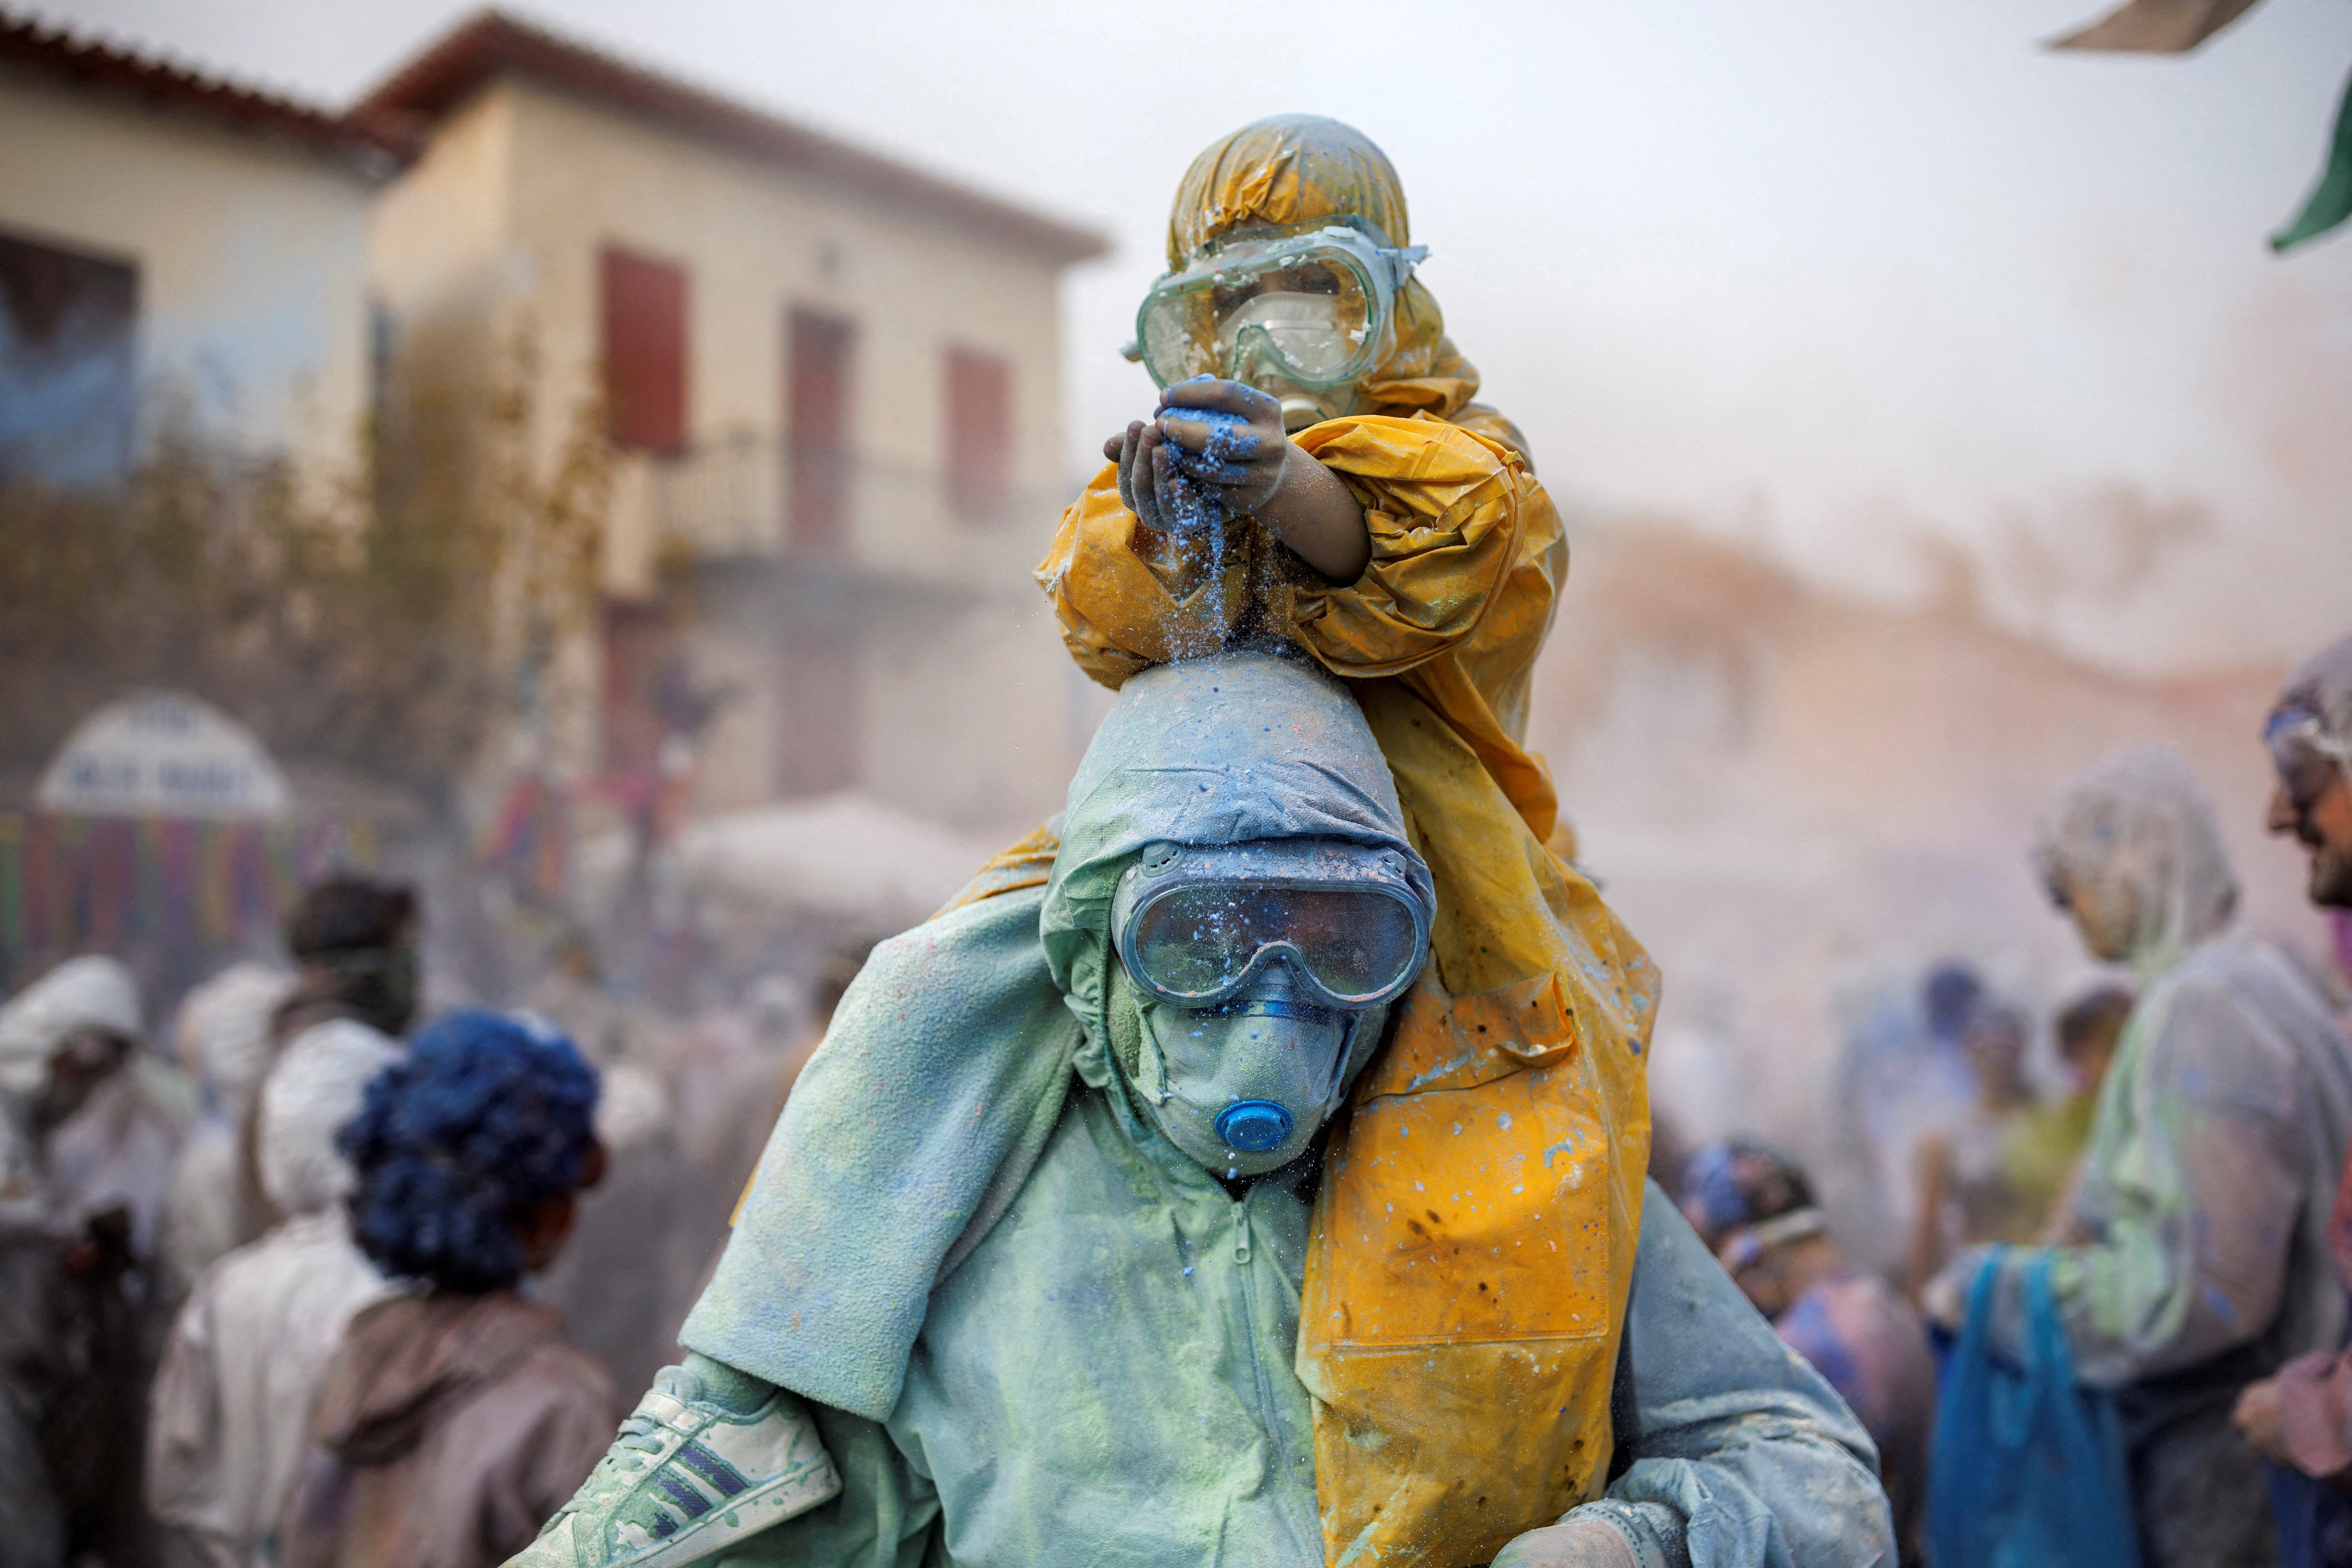 Revellers celebrate “Ash Monday” by participating in a colourful “flour war”, a traditional festivity marking the end of the carnival season and the start of the 40-day Lent period until the Orthodox Easter, in the port town of Galaxidi, Greece